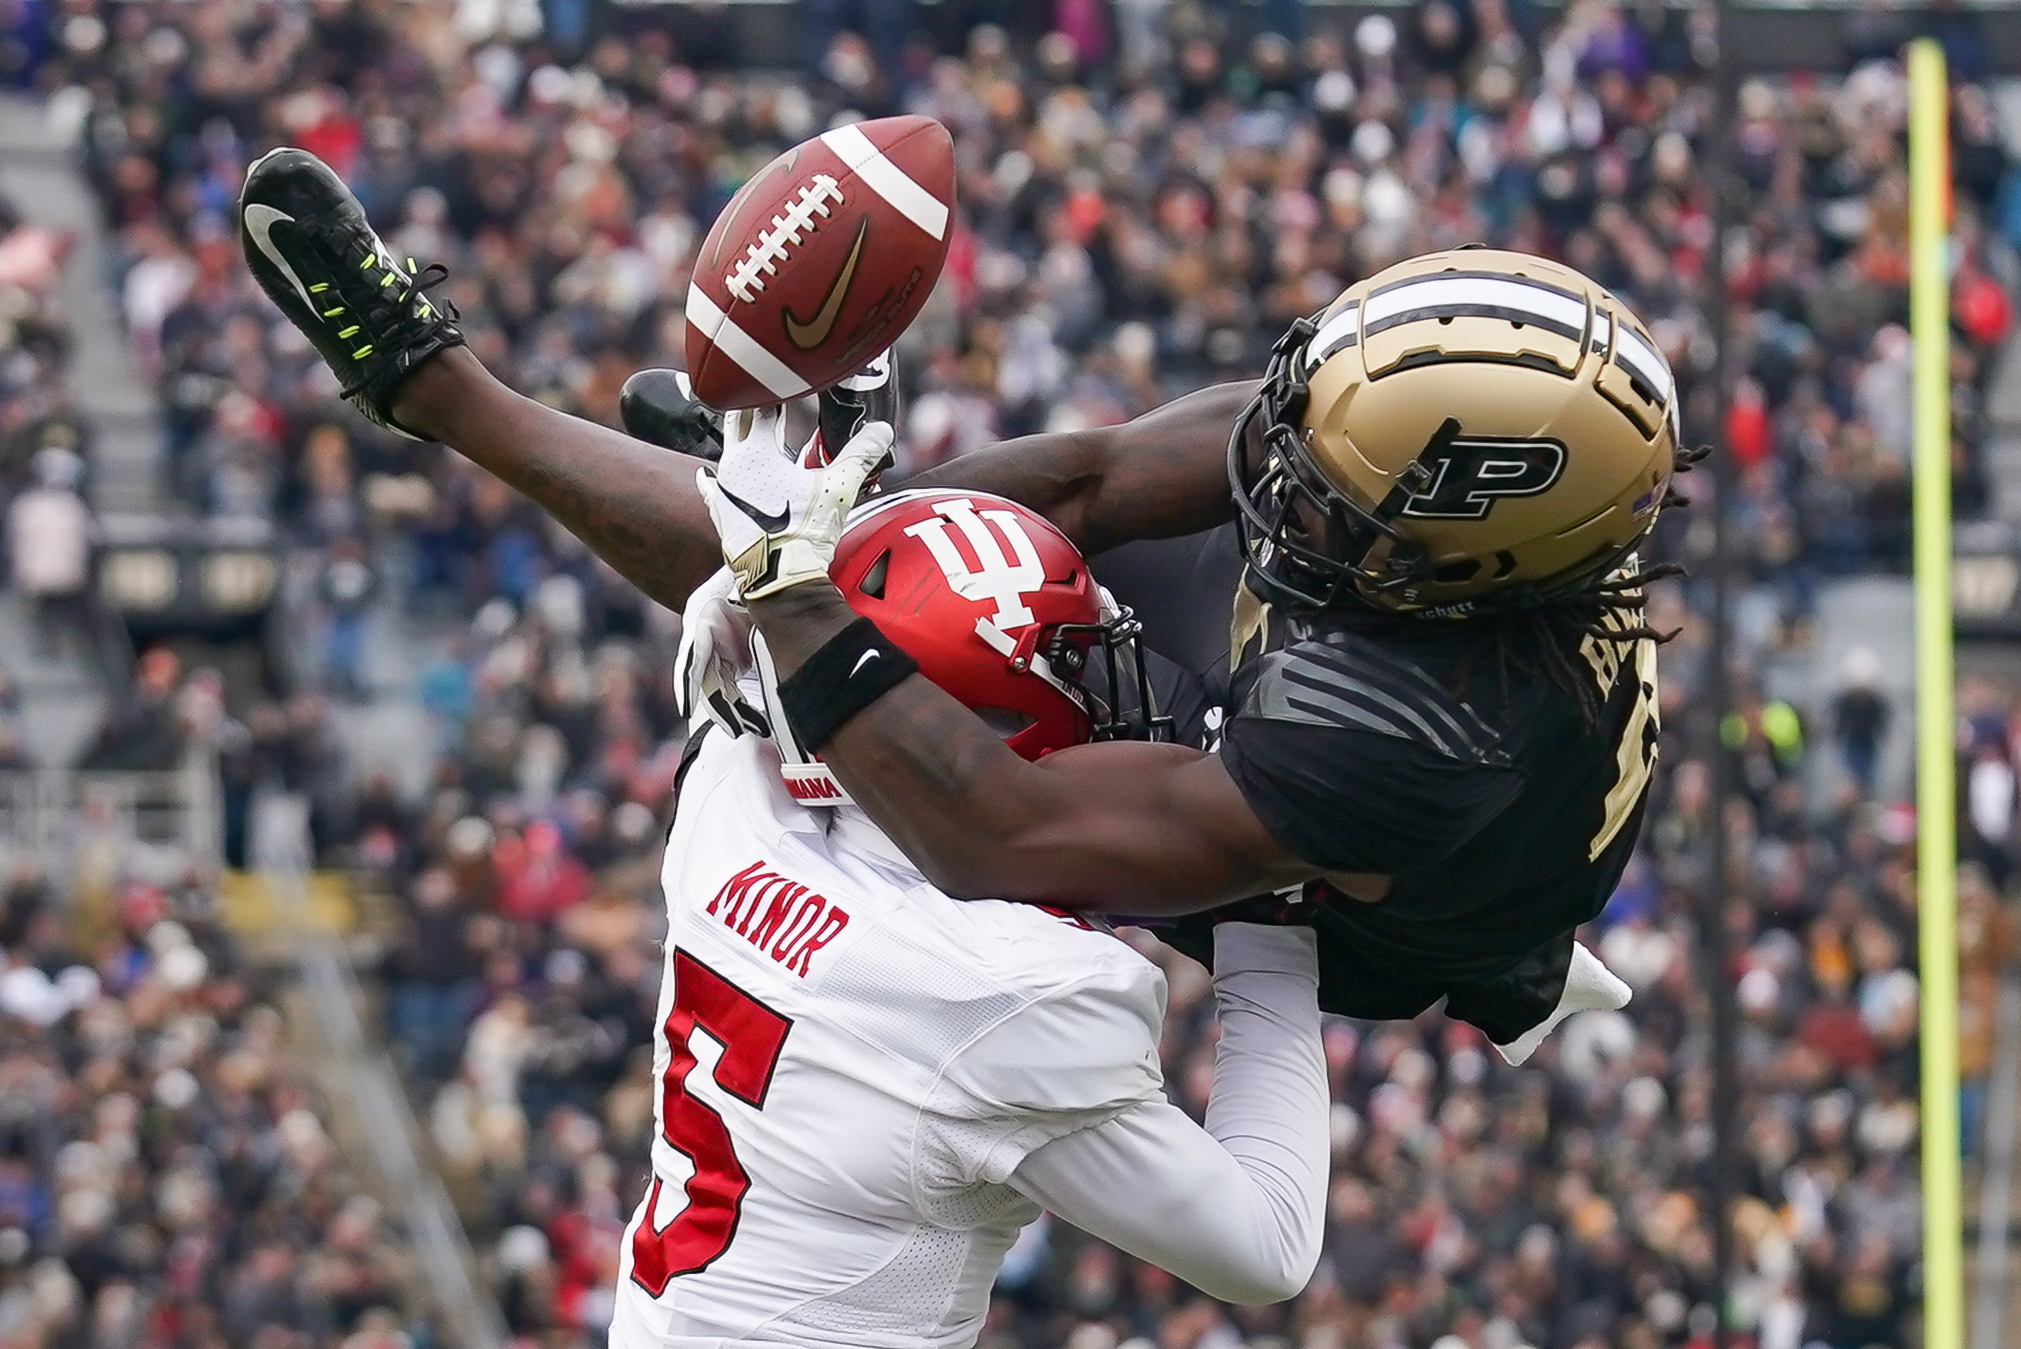 Purdue Boilermakers wide receiver Deion Burks attempts a catch against the Indian Hoosiers.